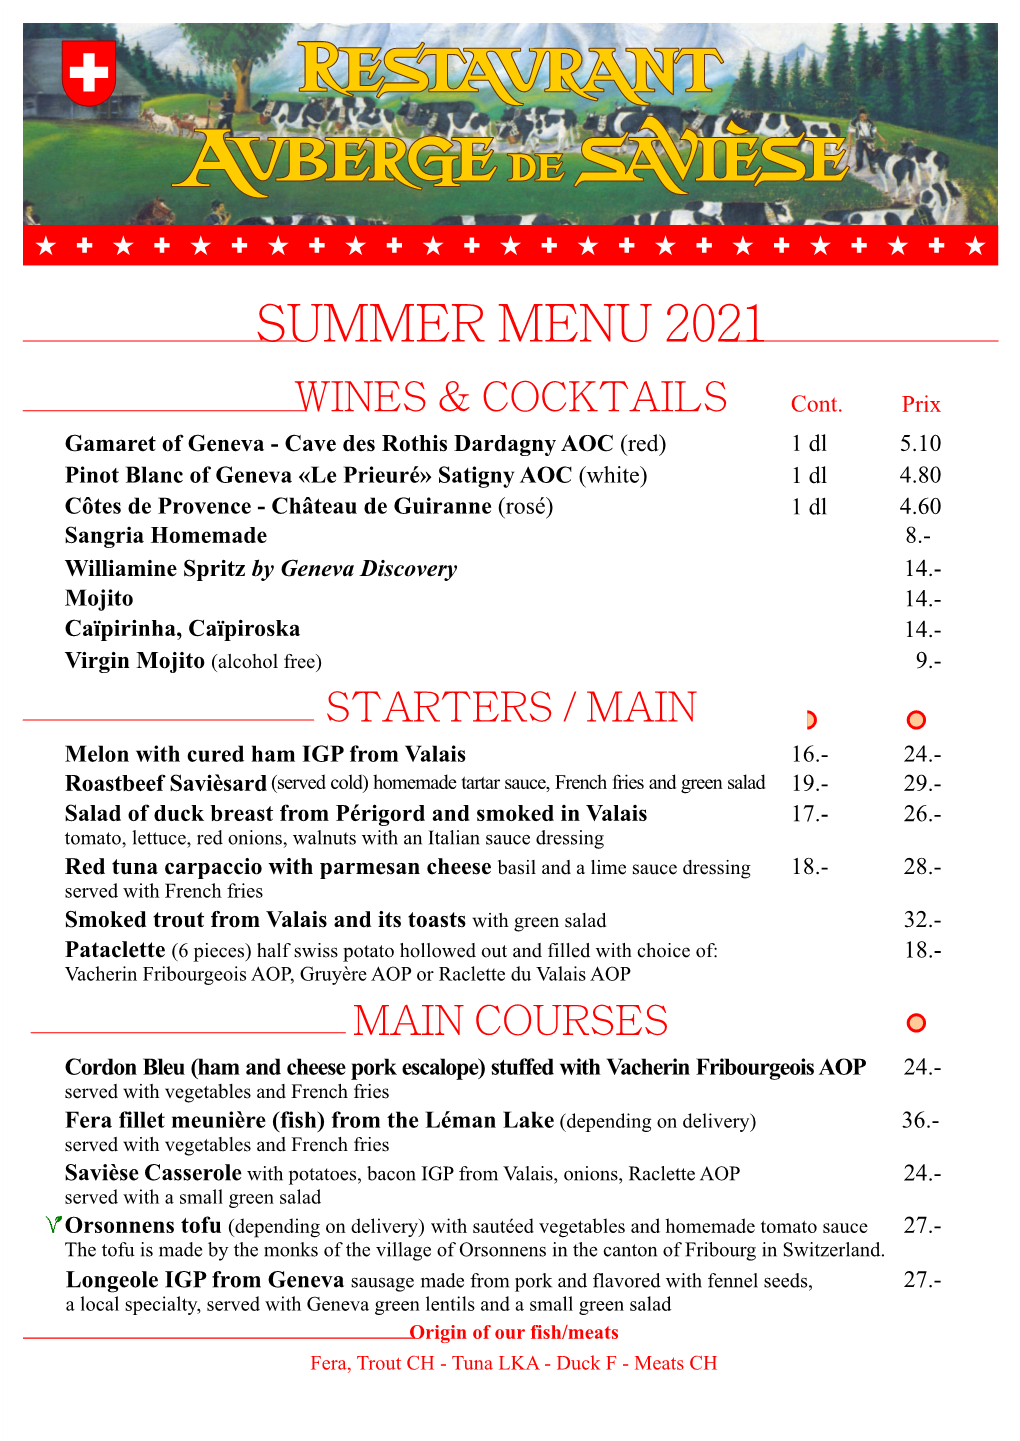 Check out Our Summer Menu 2021